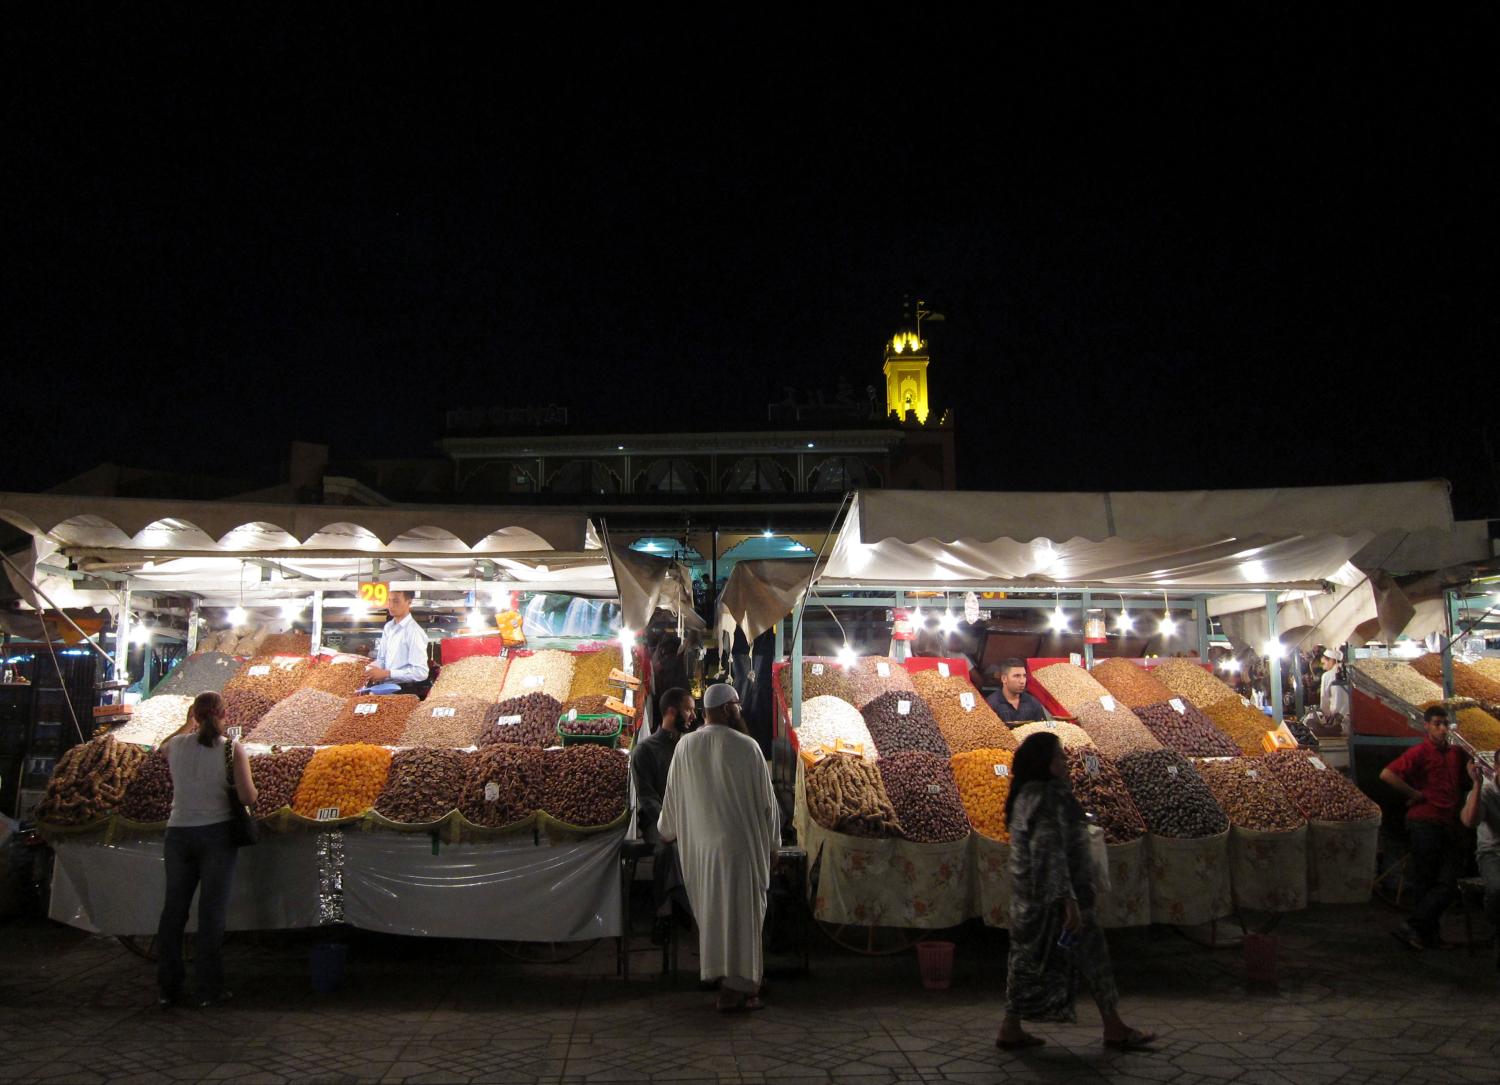 People shop for food in Djemaa El Fna square in Marrakesh July 8, 2010.   REUTERS/Lucy Nicholson (MOROCCO - Tags: SOCIETY TRAVEL) - GM1E67L0L0U01